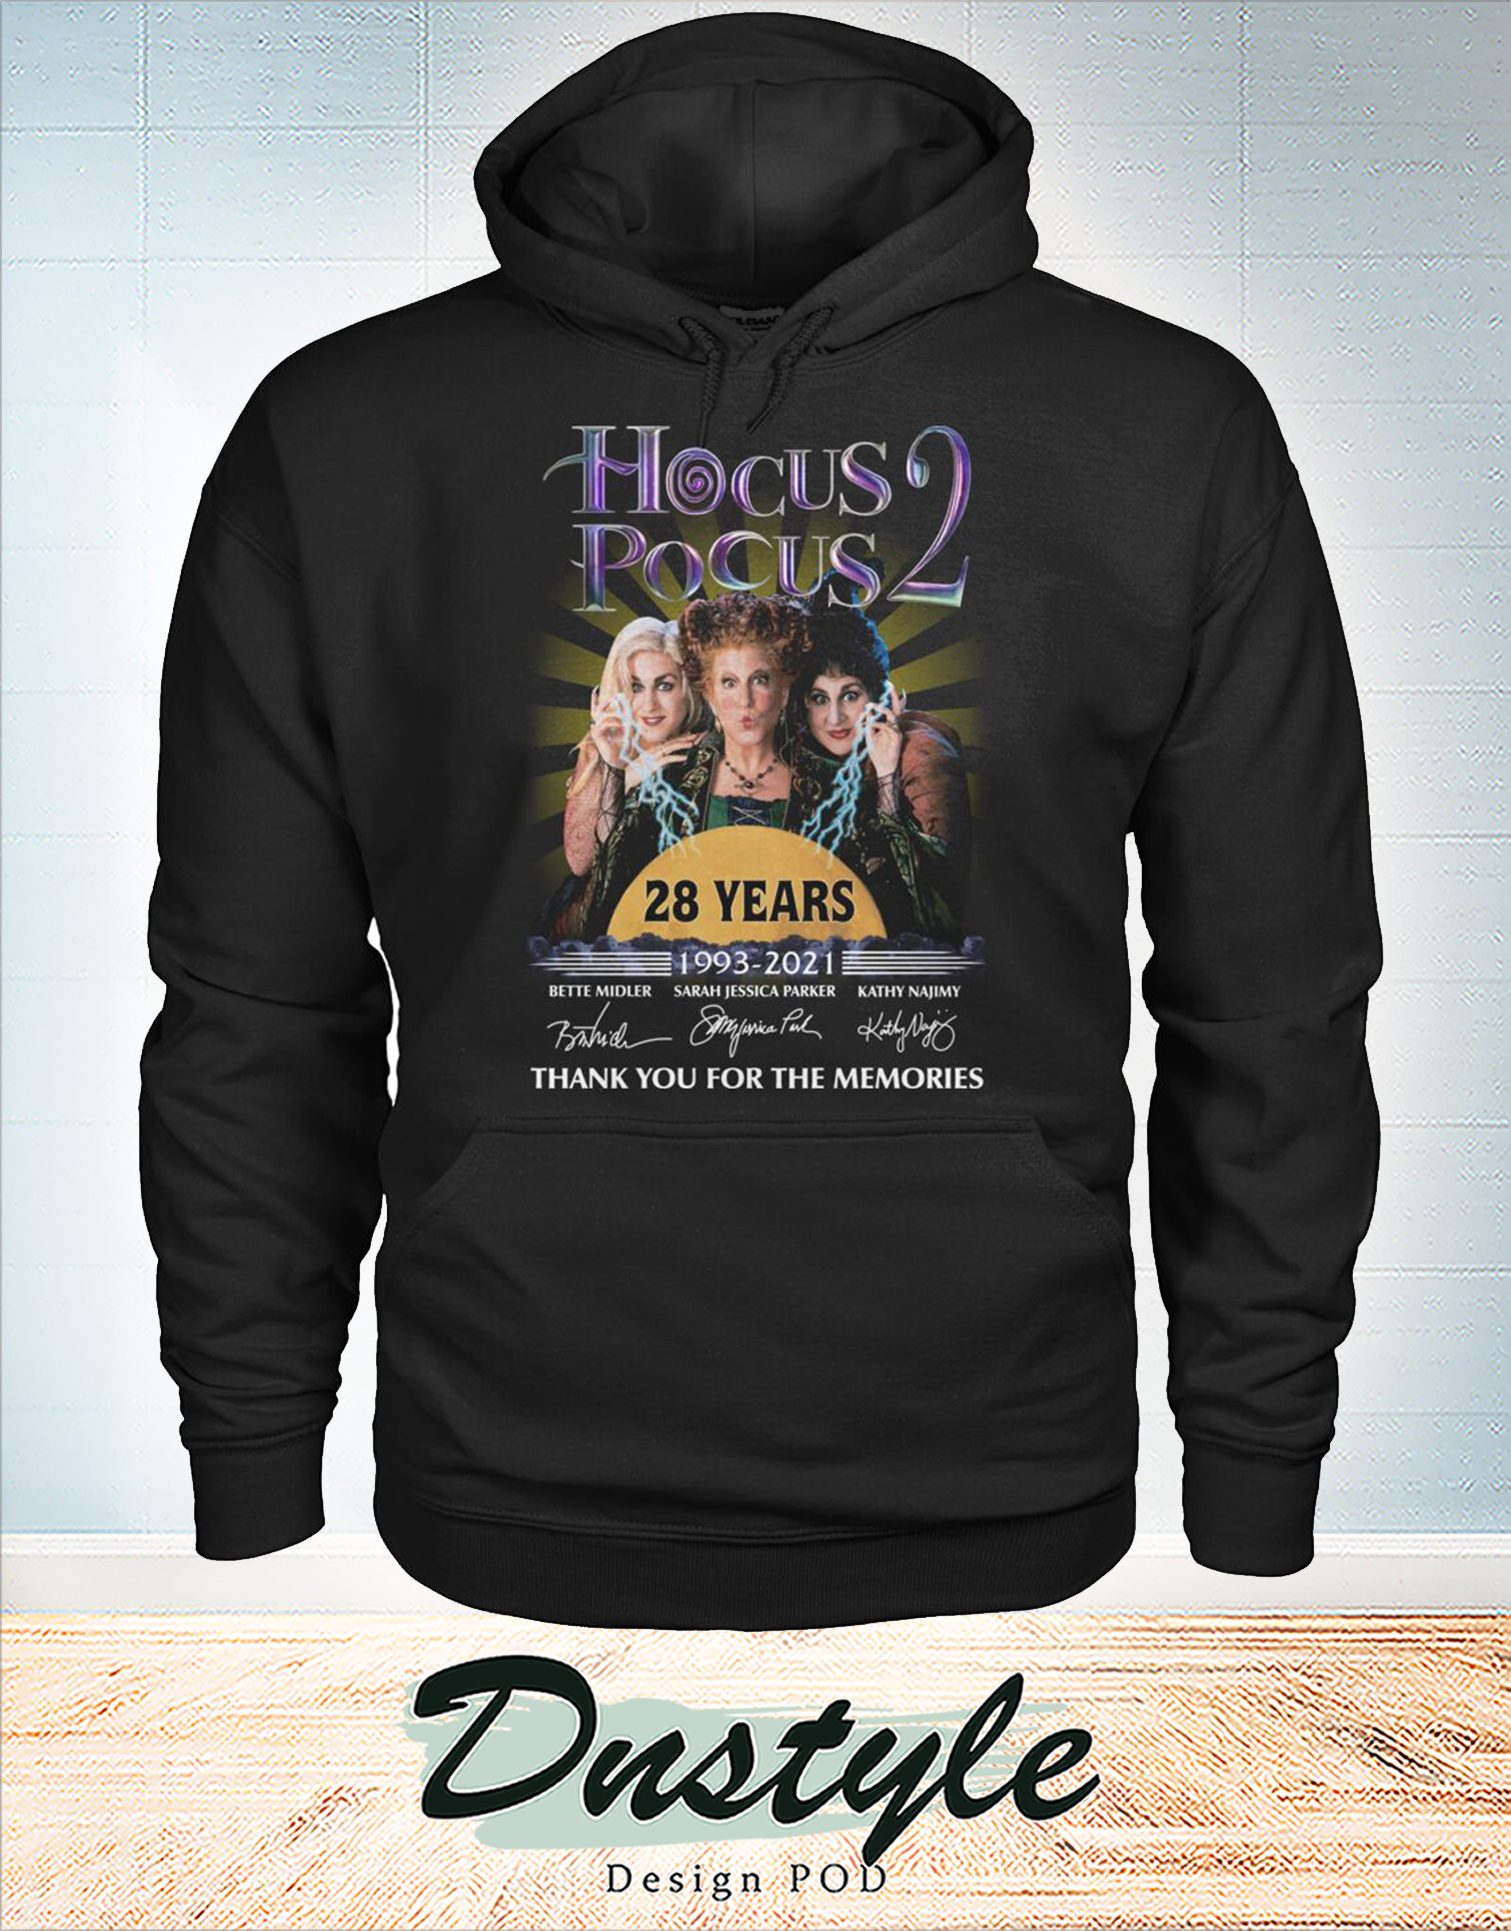 Hocus pocus 28 years thank you for the memories hoodie